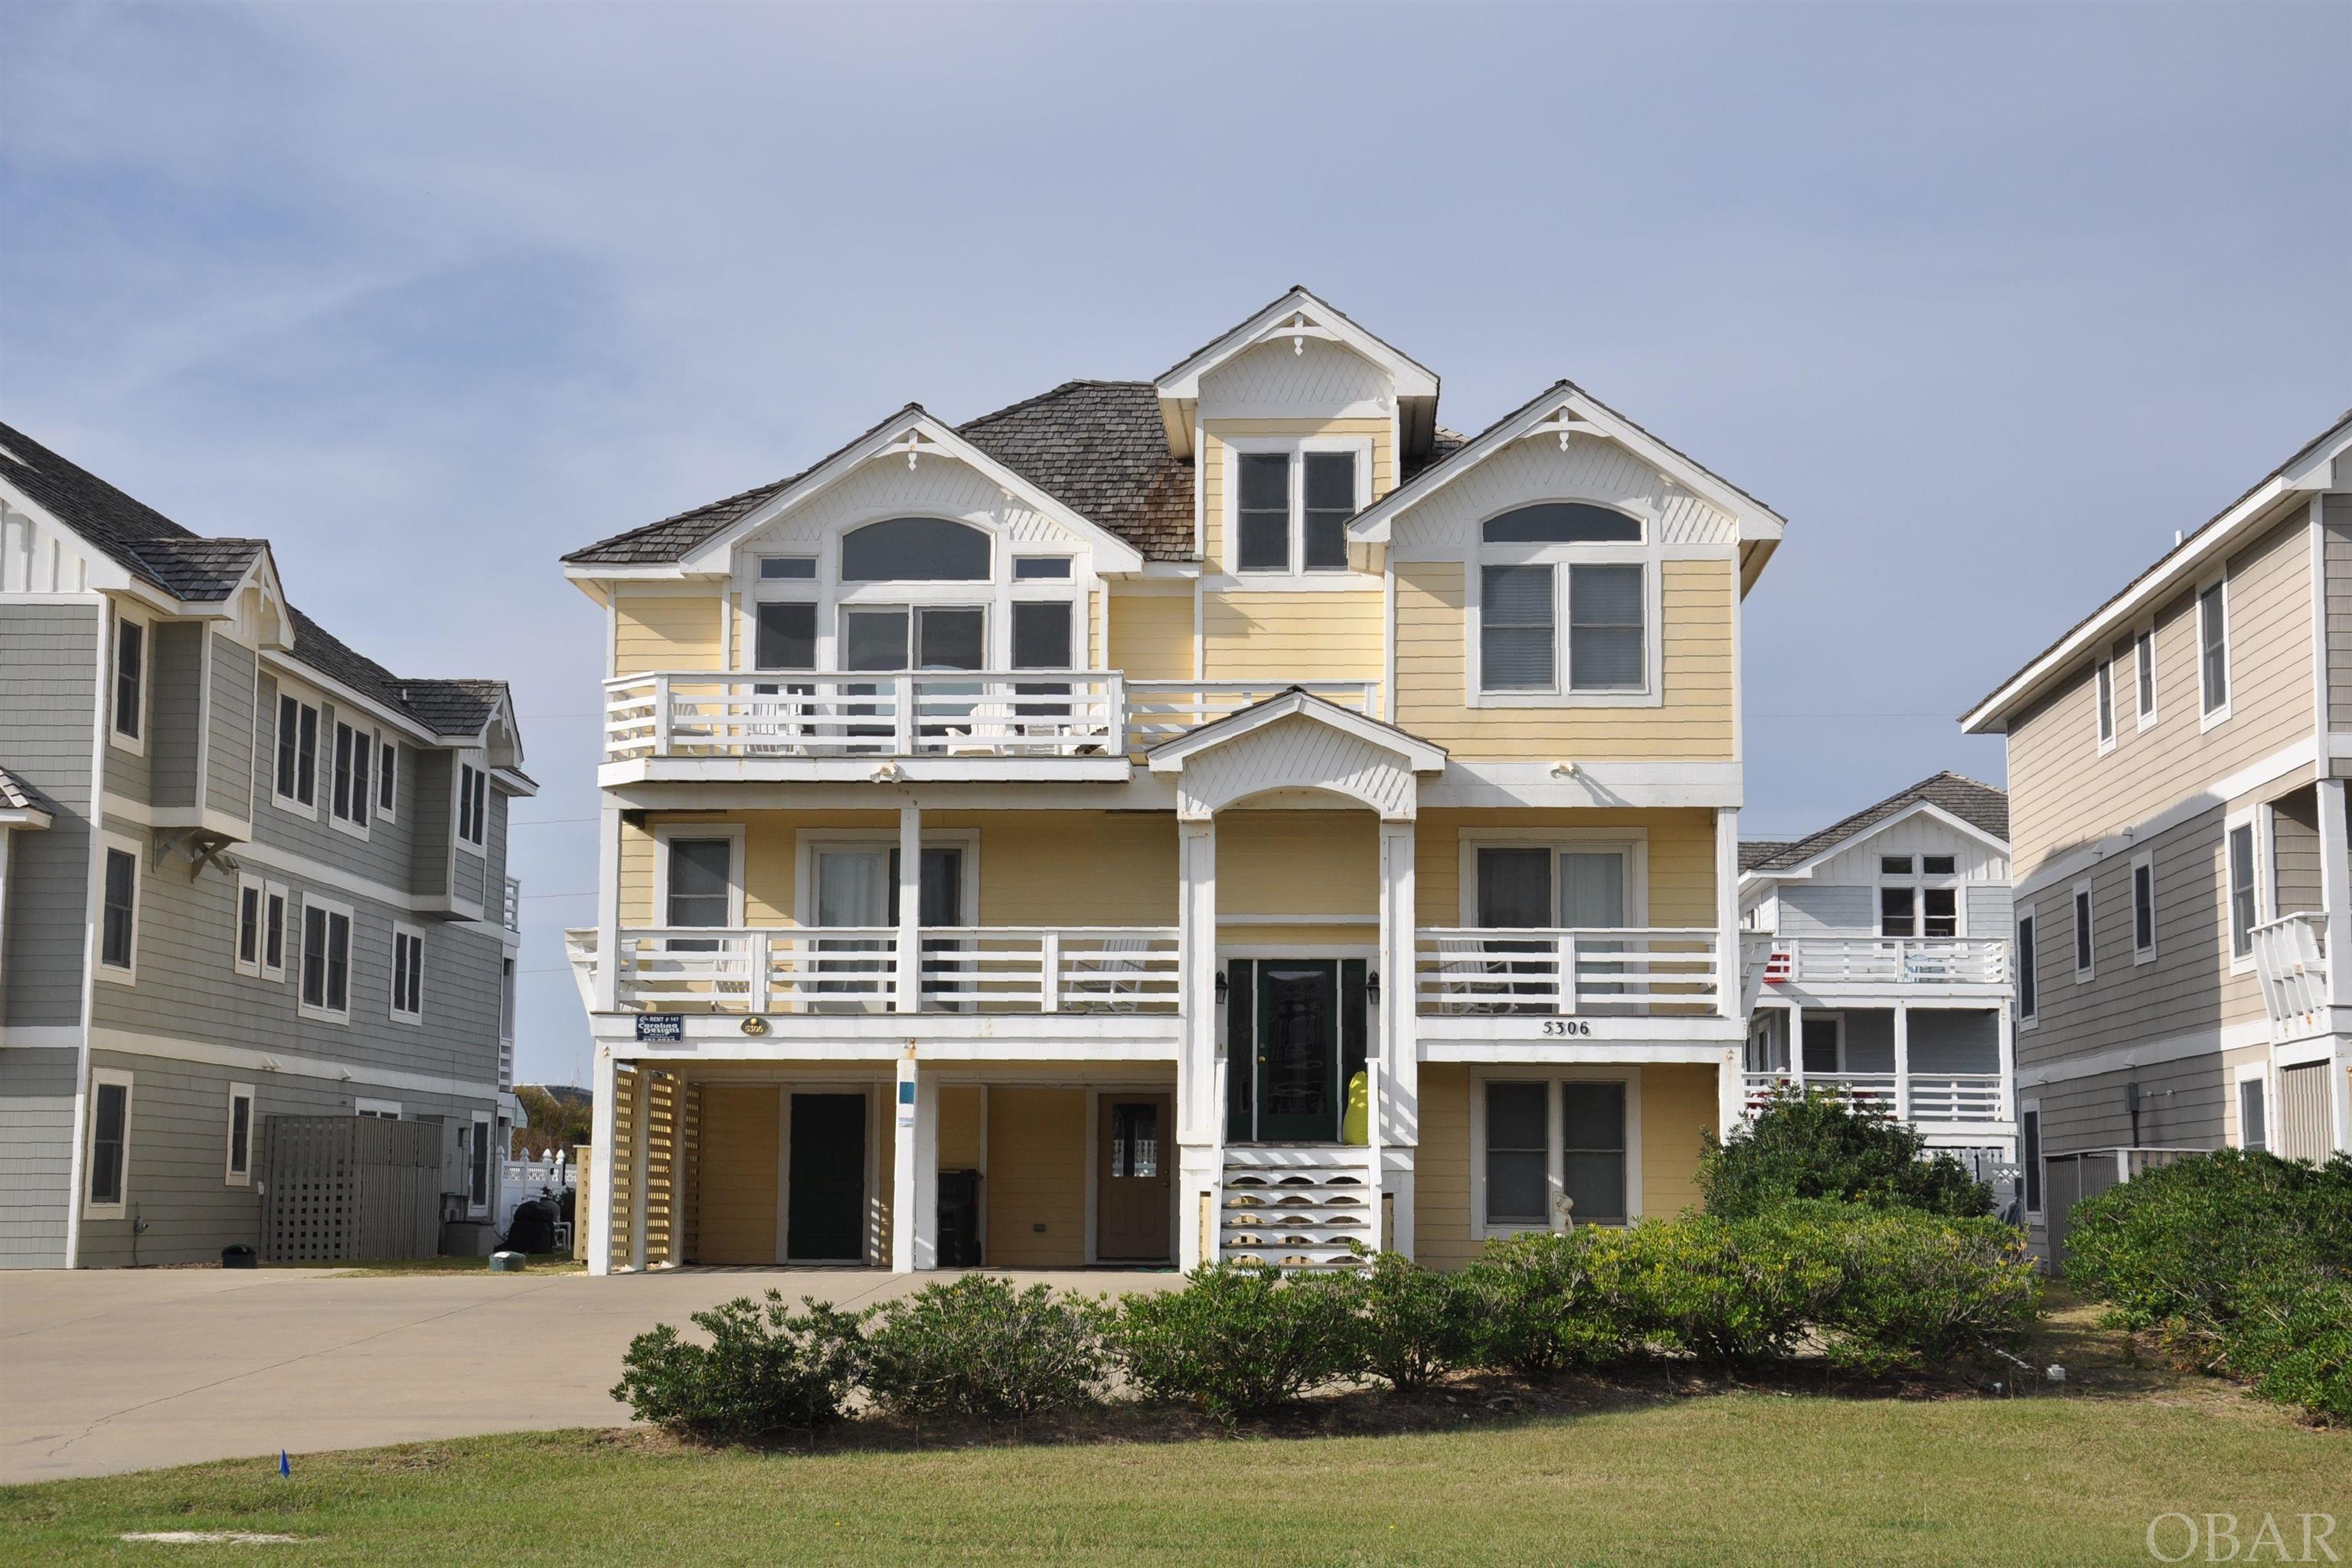 This stunning semi-oceanfront residence boasts an expansive layout, featuring eight bedrooms and seven and a half bathrooms. Its prime location in the heart of the Village of Nags Head provides convenient access to VNH private beach access and two Sound front parks with kayak access.  The Nags Head Golf Links and VNH Oceanfront Pool, tennis, oceanfront clubhouse are all within walking distance and available at additional costs.  Within a few miles there are three piers, Jockeys Ridge, Nags Head Woods, shopping and plenty of fantastic restaurants.  This coastal home offers a well-designed floor plan that ensures a comfortable stay for everyone. The upper level features an open design, perfect for entertaining large groups. The spacious kitchen is fully equipped and appointed with granite countertops. Adjacent to the kitchen, you will find an expansive dining area with two large dining tables, flanked by a comfortable living area offering ocean views. The home also boasts large decks both at the front and back, perfect for enjoying the outdoors.  For added convenience, an ELEVATOR is available to take you down to ground level. Here, you will discover a spacious game room complete with a slate pool table, full-sized fridge, wet bar, and an ice machine pub tables & chairs. Step outside, and you will find an oasis with a private swimming pool, a hot tub, and a tiki bar.   The home includes eight bedrooms, a reading room, and plenty of space to accommodate guests comfortably.   Being handicap accessible makes for easier access for many.  Sun Realty annual projection of $168,000 in owner income!!!